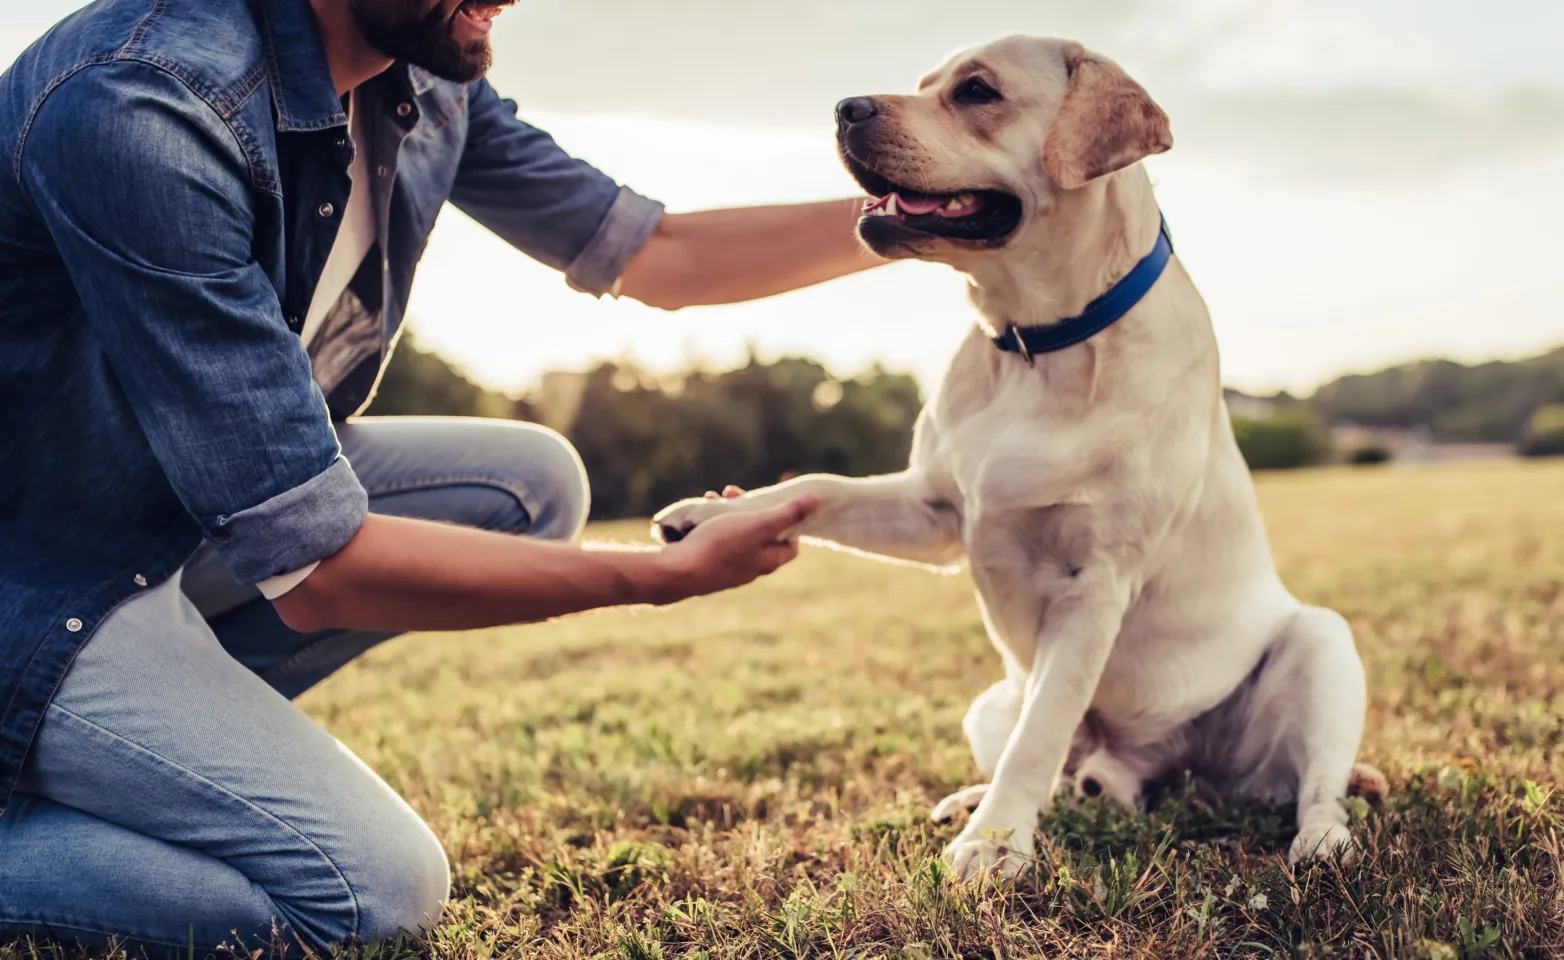 Dog and man shaking hands